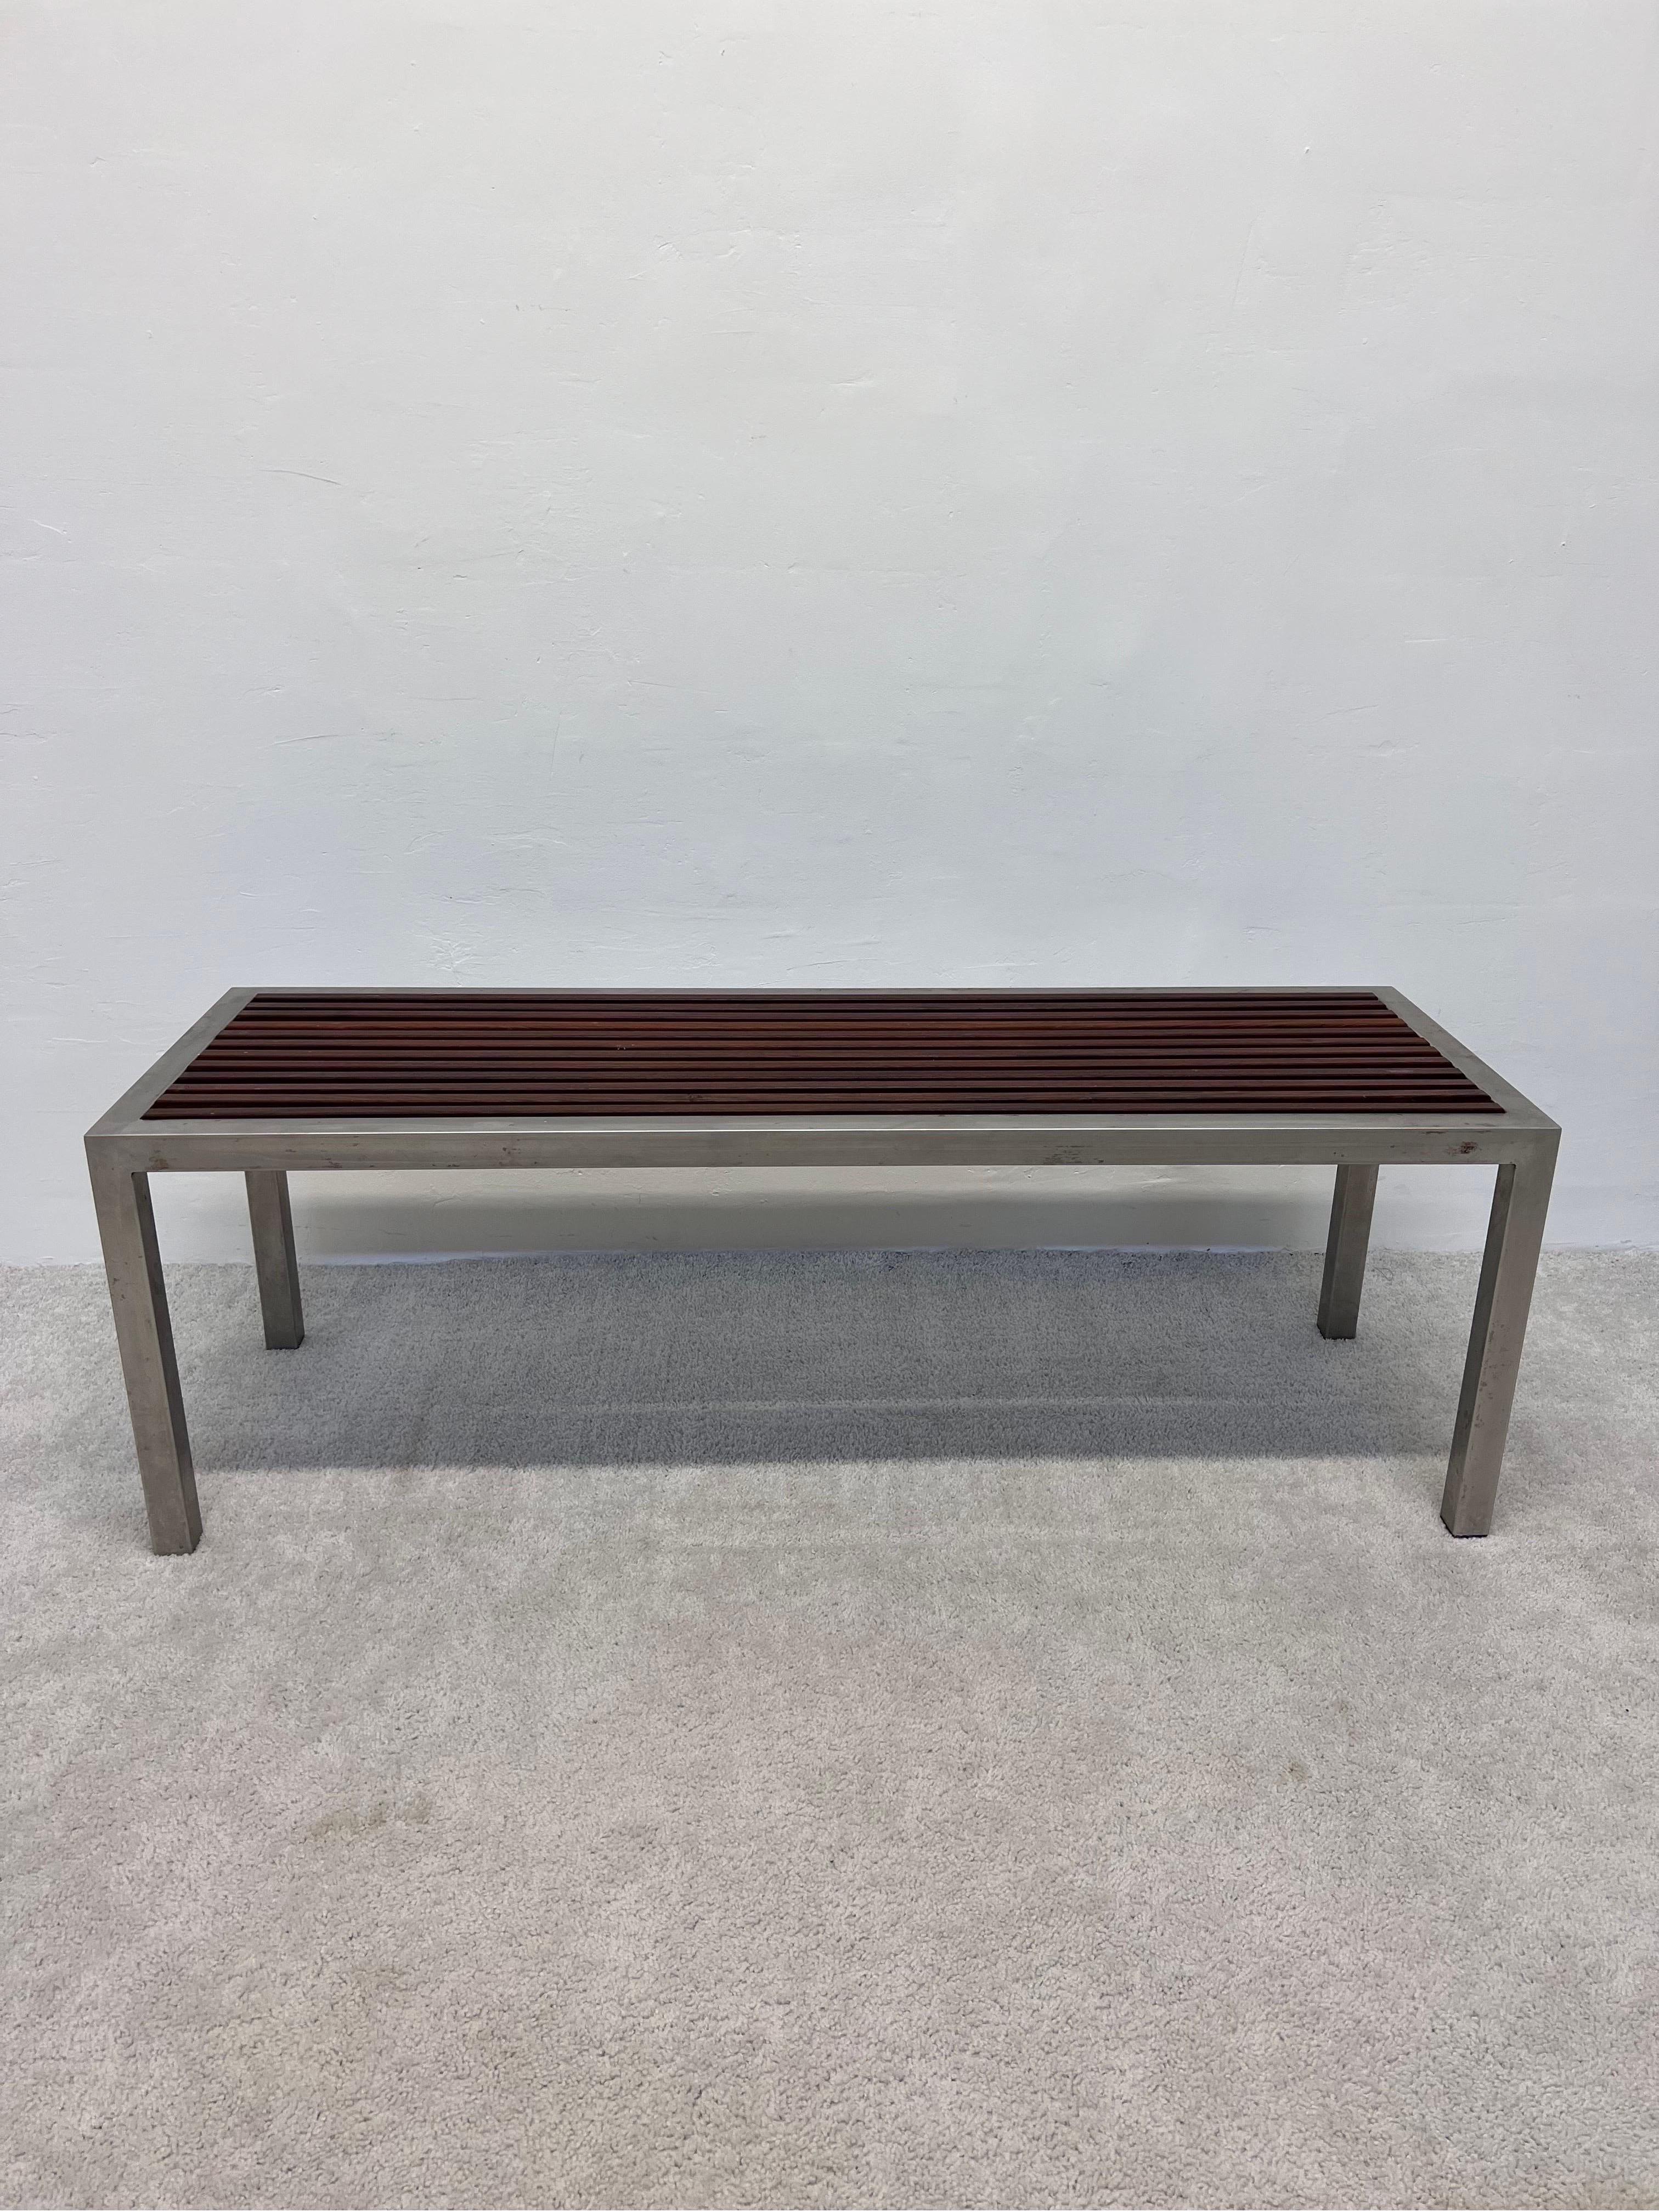 Steel frame bench with teak slats in the Parsons style, 1970s.